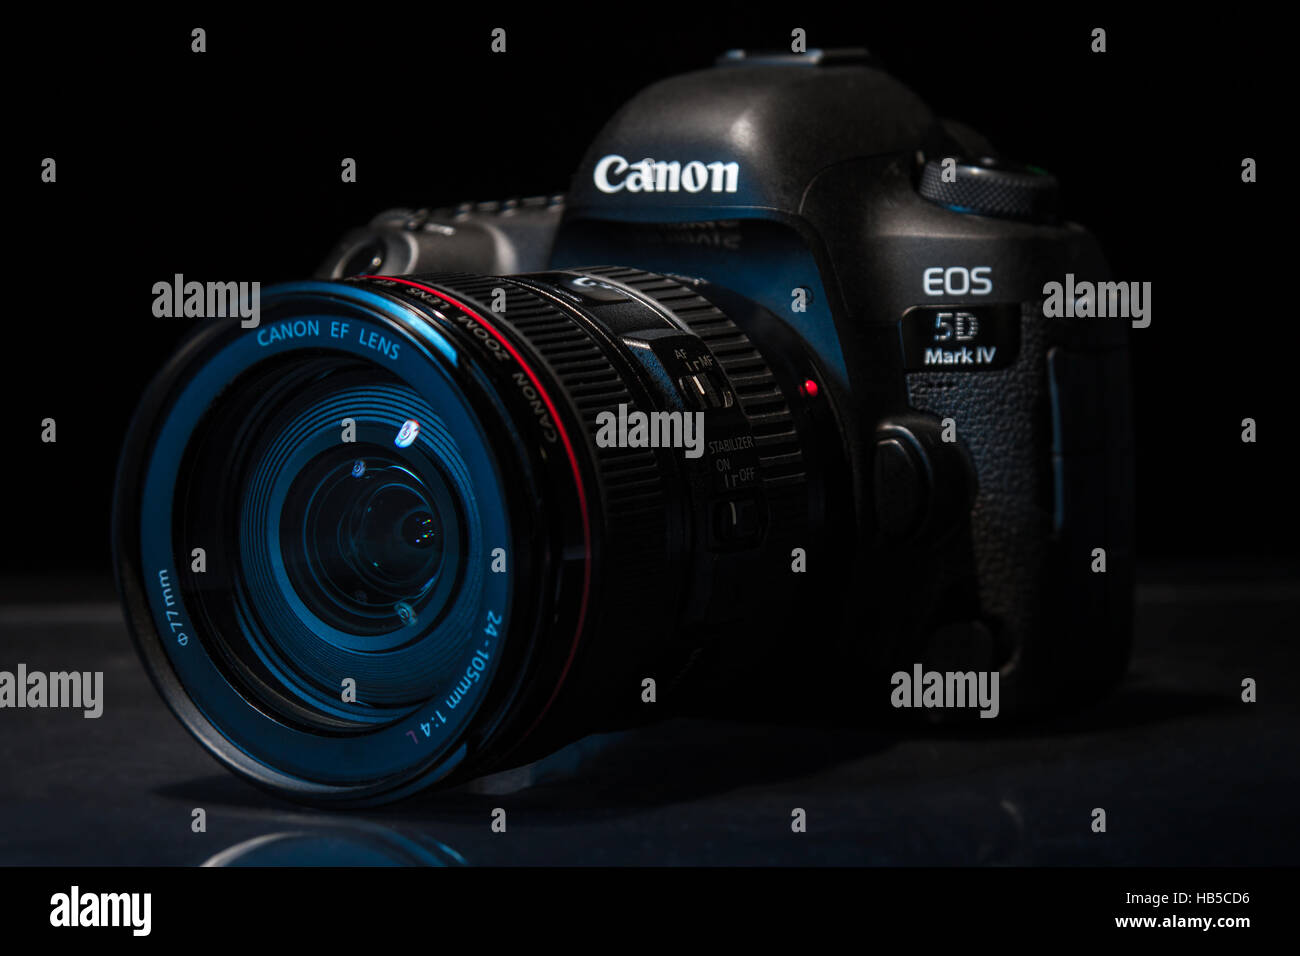 Canon 5D Mark IV camera with Canon EF 70-200mm f/2.8L II USM lens on a dark background Stock Photo